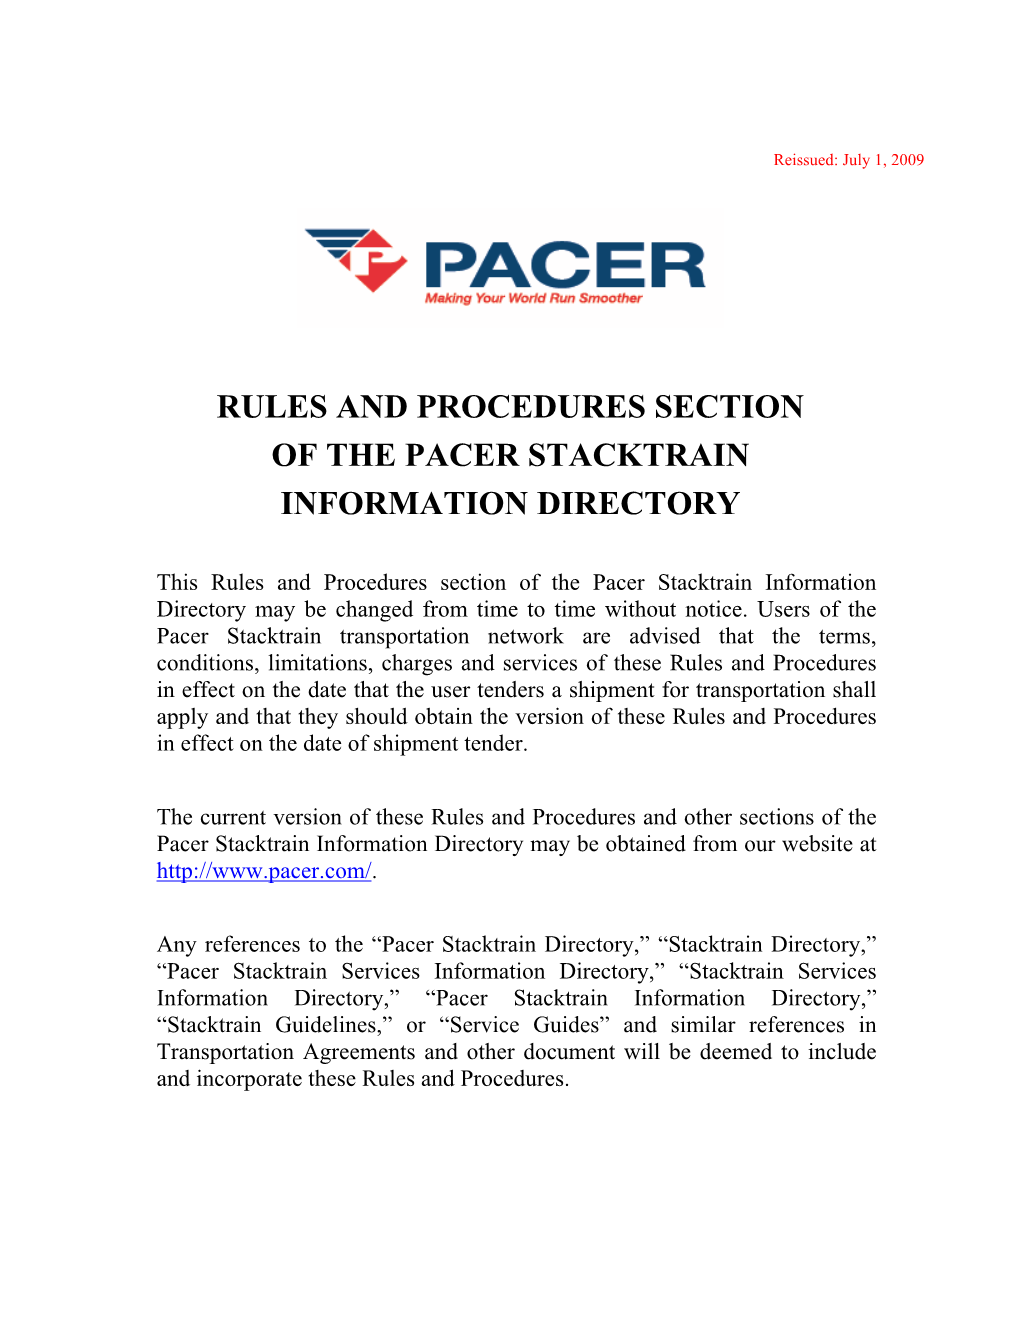 Rules and Procedures Section of the Pacer Stacktrain Information Directory